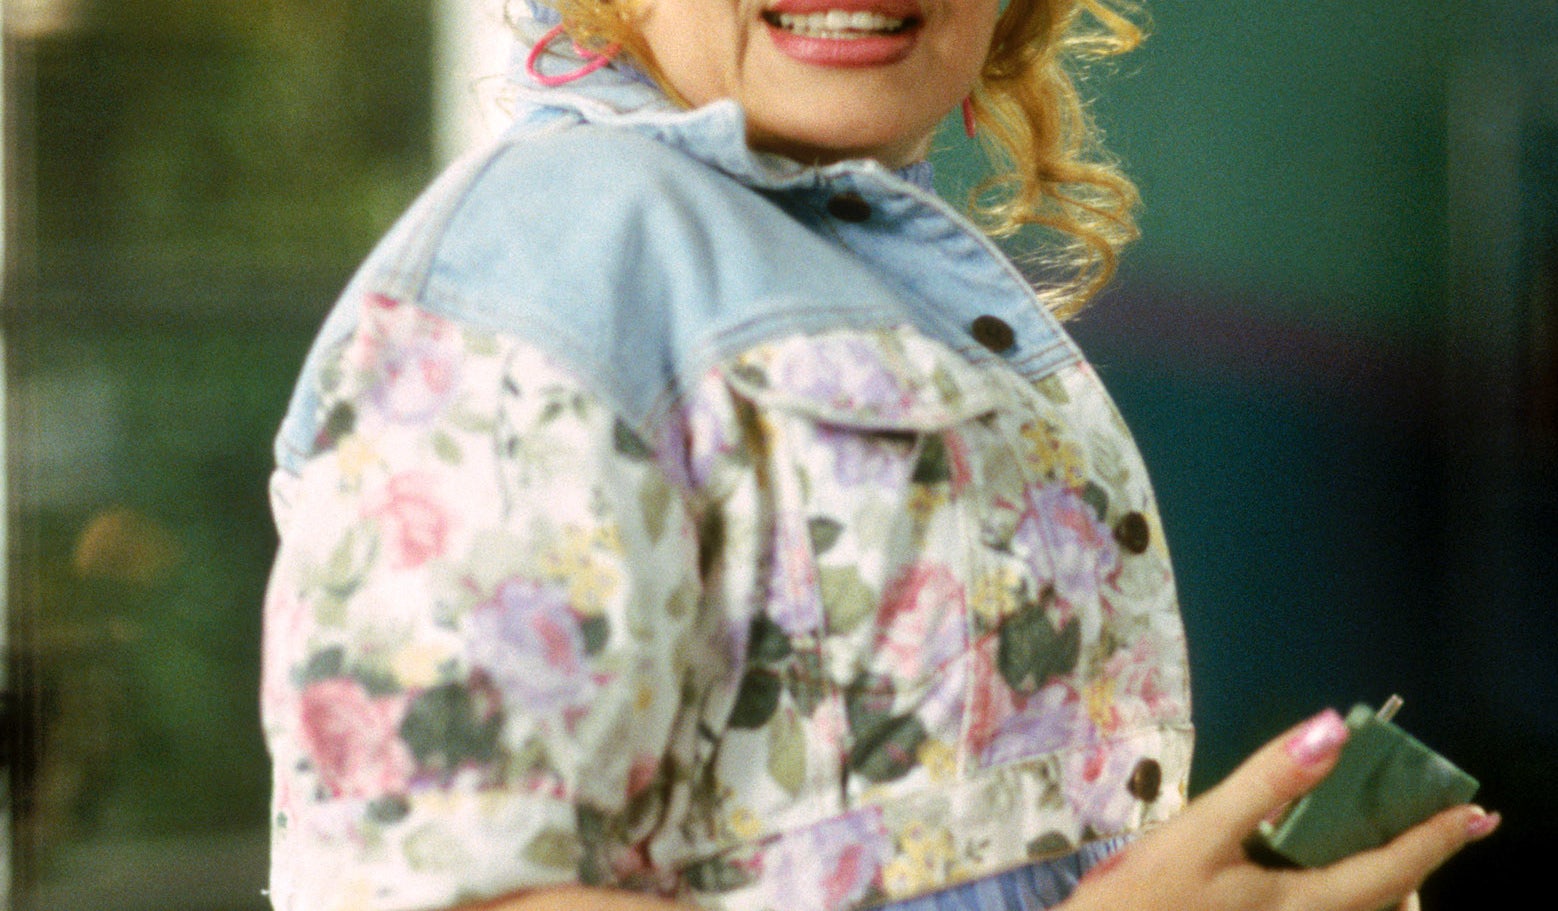 Paulette with curly hair tied half up and wearing a jean jacket, looking surprised